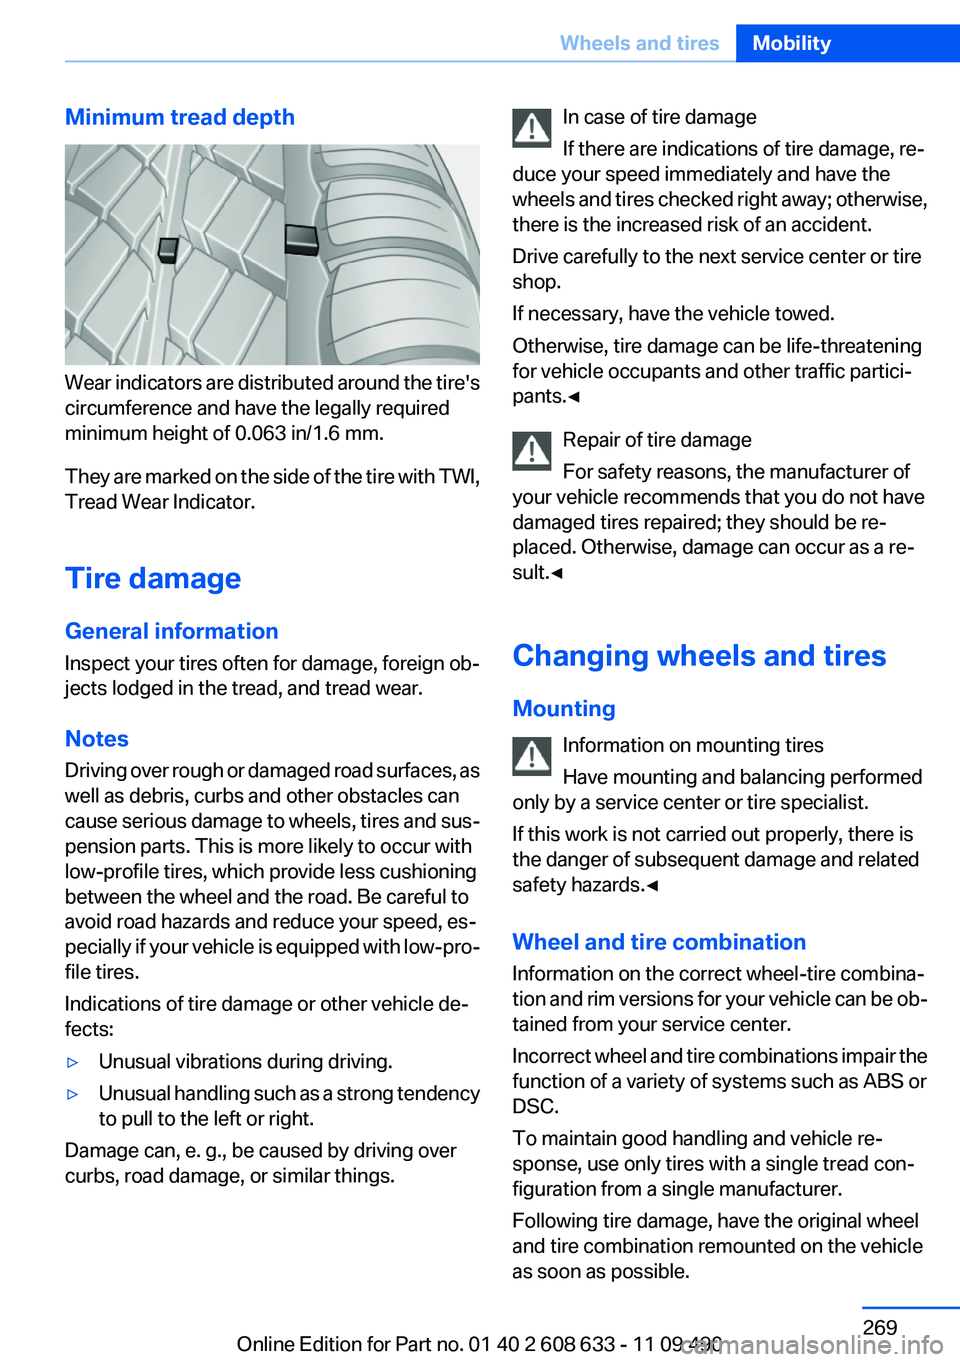 BMW 3 SERIES 2011  Owners Manual Minimum tread depth
Wear indicators are distributed around the tire's
circumference and have the legally required
minimum height of 0.063 in/1.6 mm.
They are marked on the side of the tire with TW